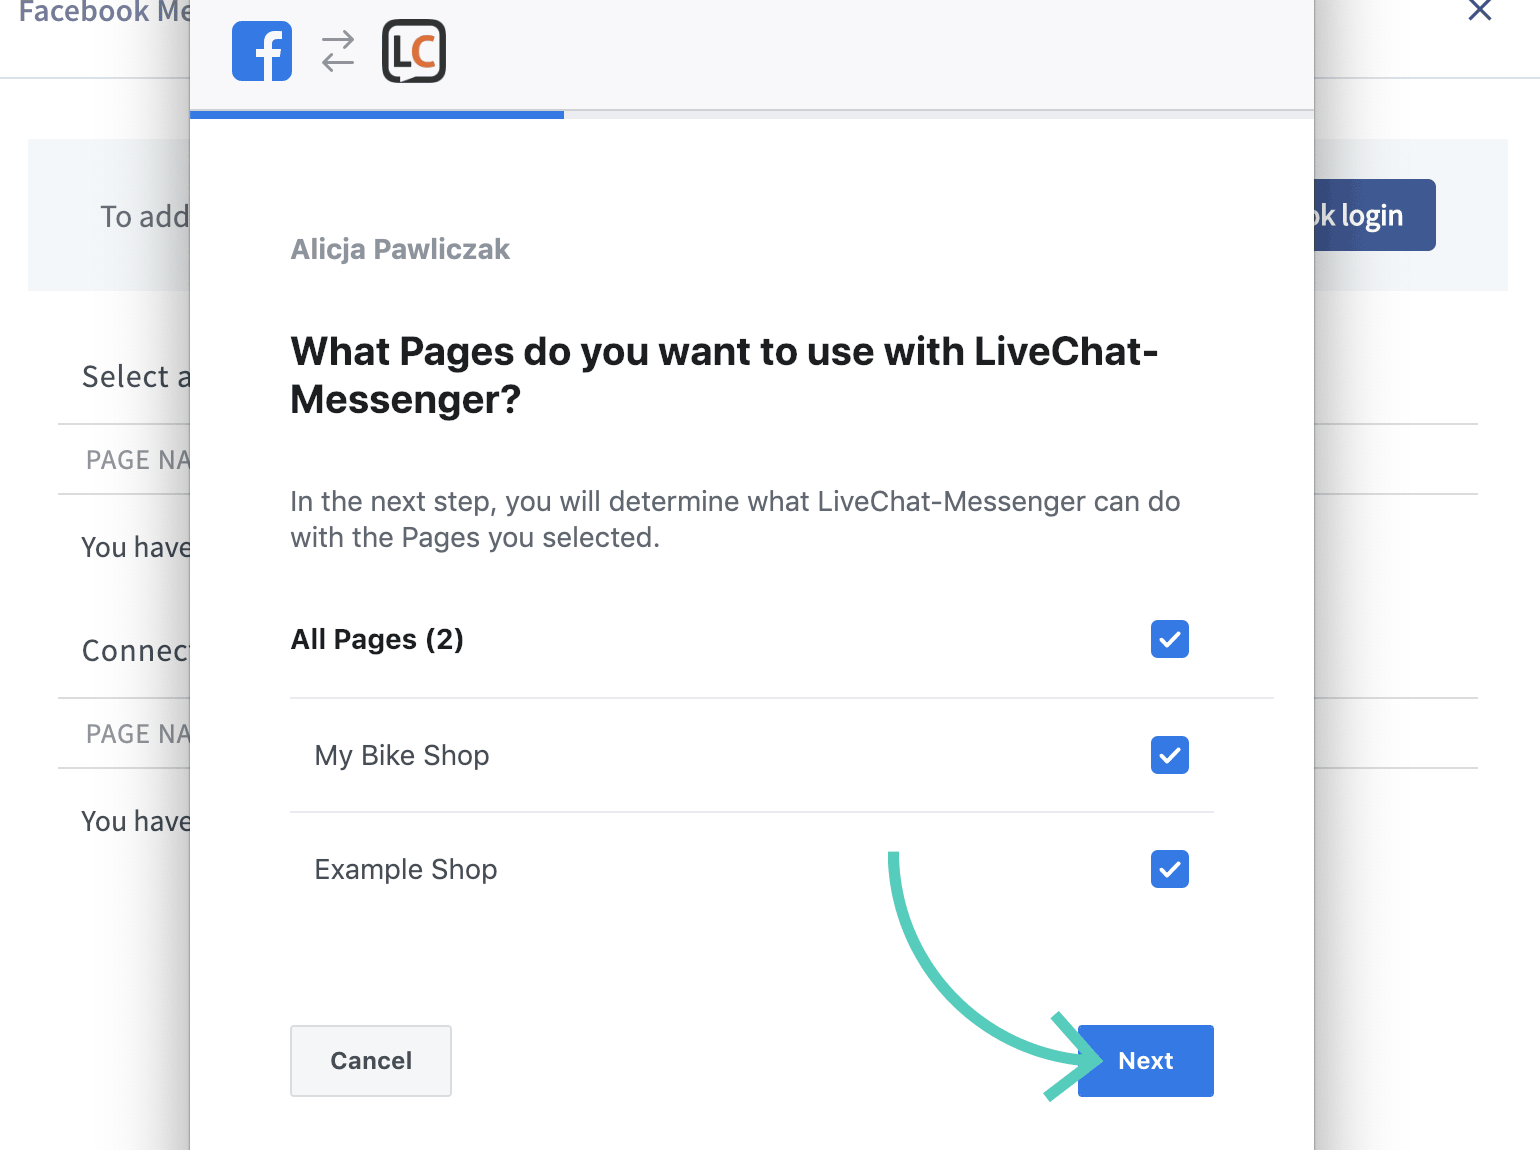 Facebook with live chat